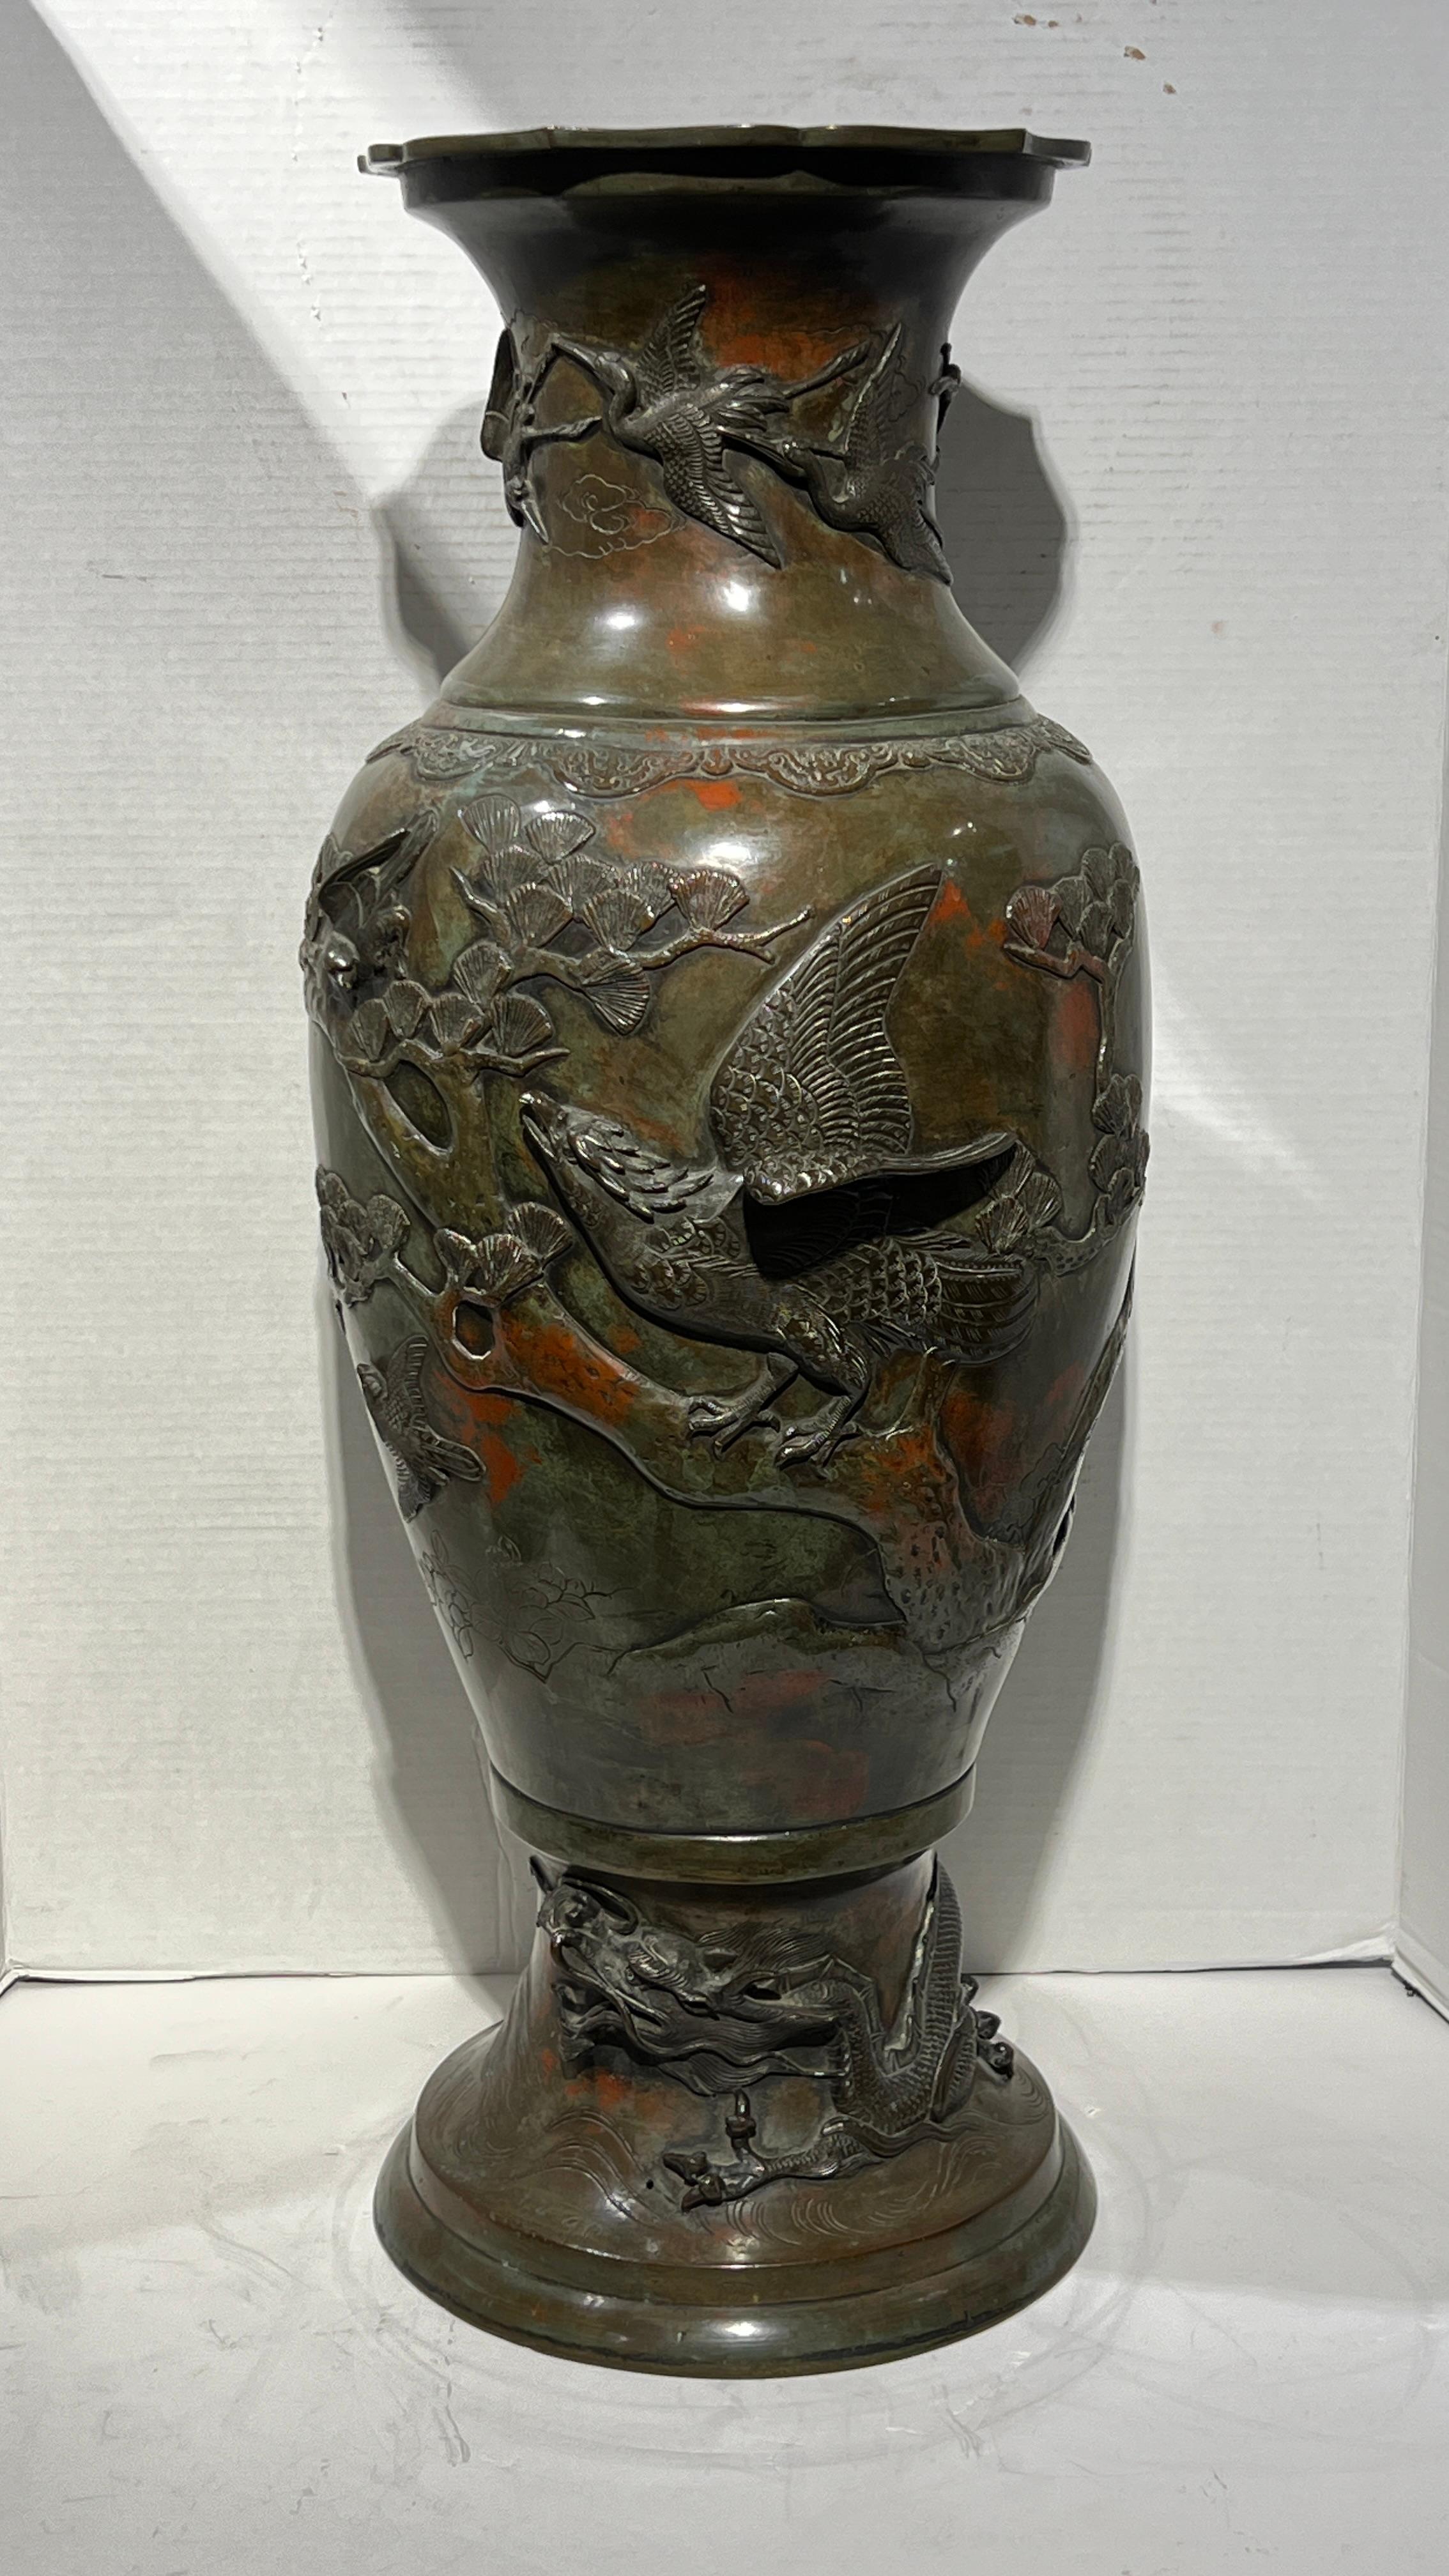 Very special and finely cast bronze vase with peacock and other birds in relief, with exceptional polychrome patina.  29 7/8 inches.  See our other listing for a very similar vase, as they would make a lovely matched pair.